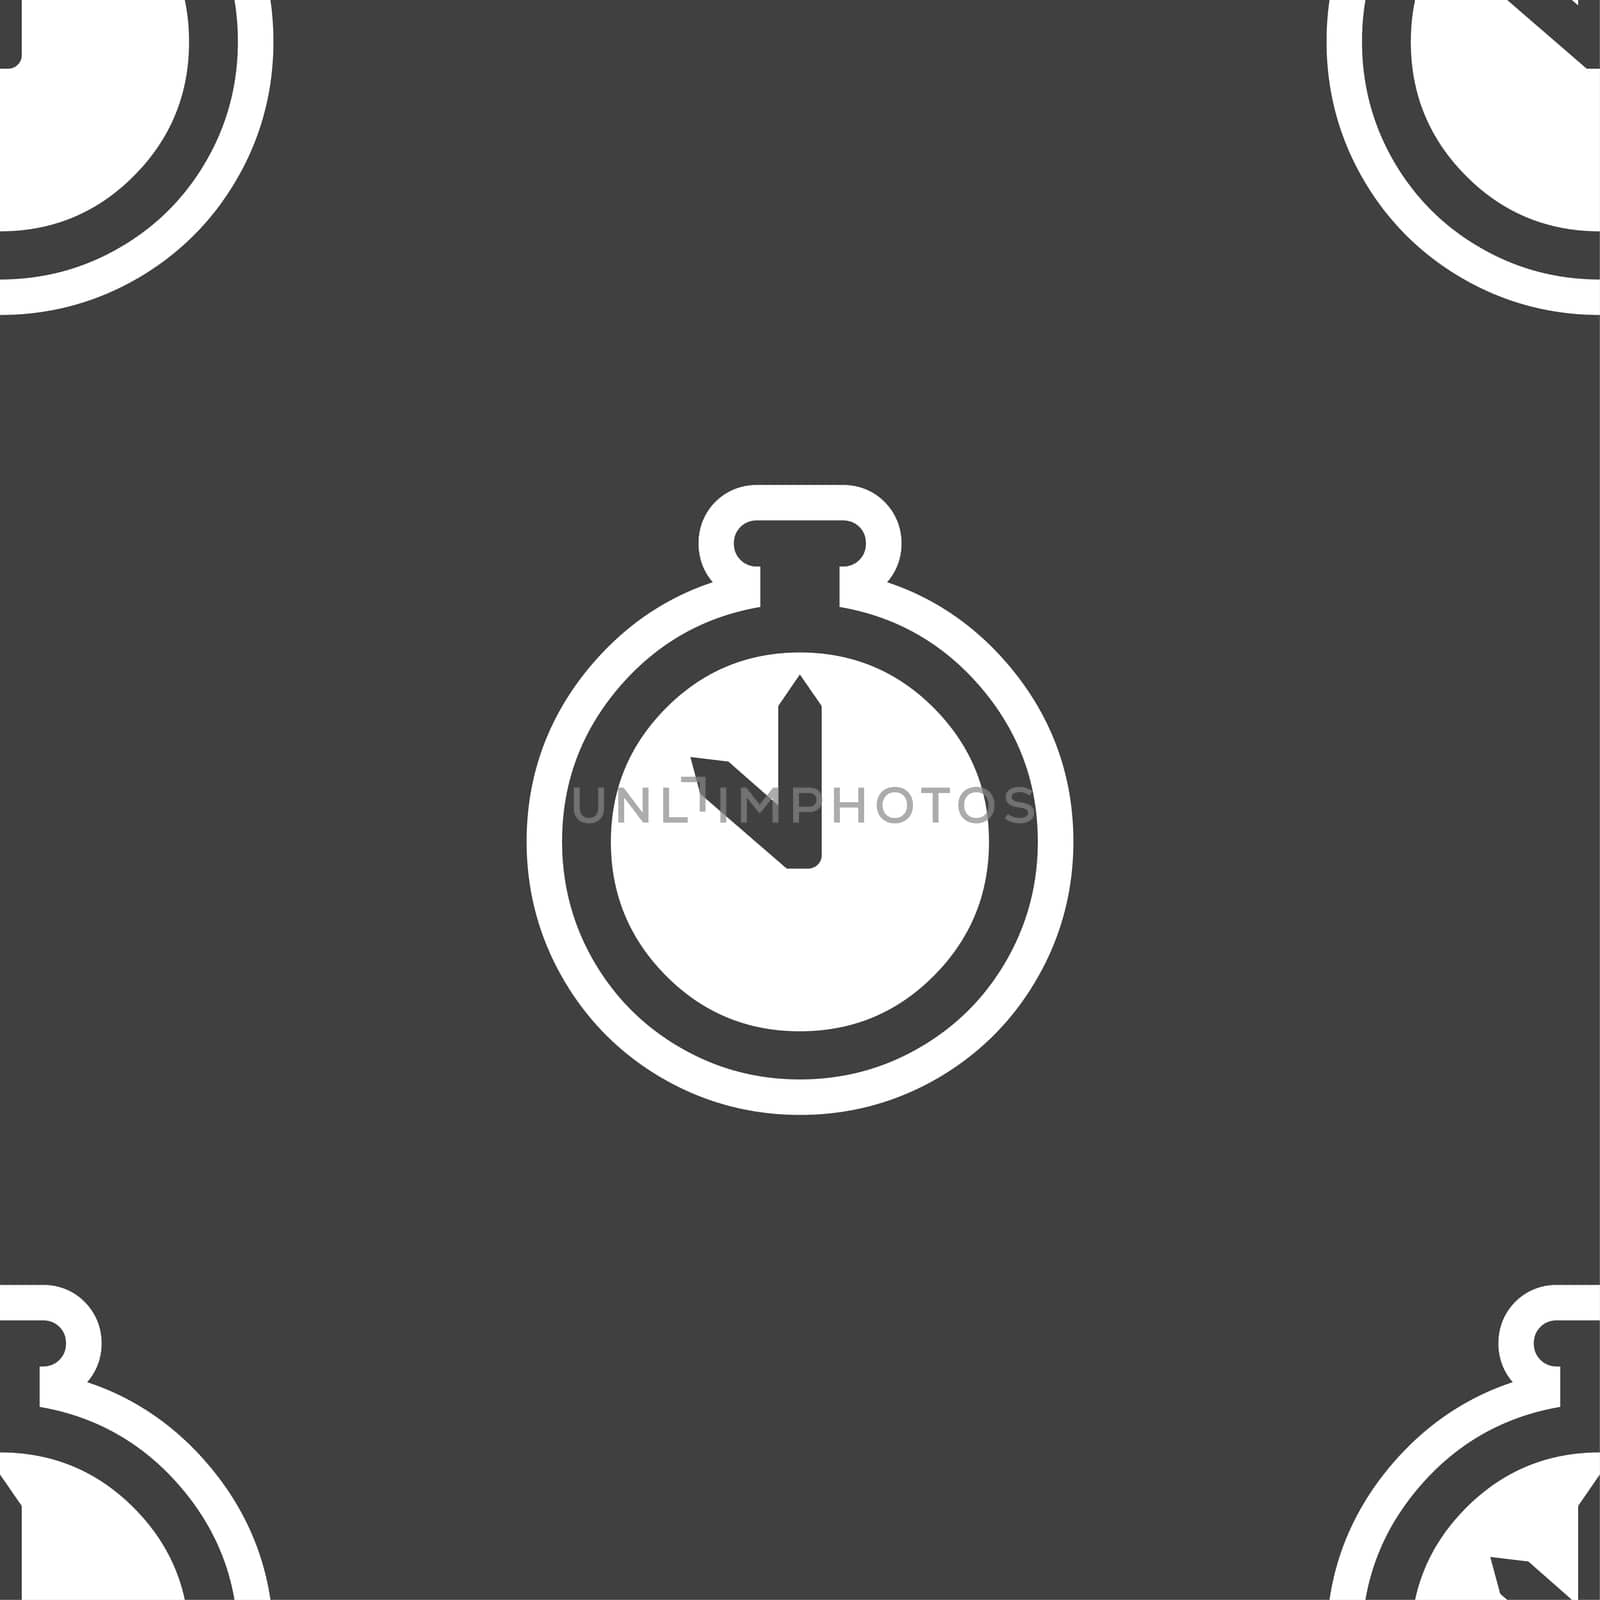 The stopwatch icon sign. Seamless pattern on a gray background. illustration